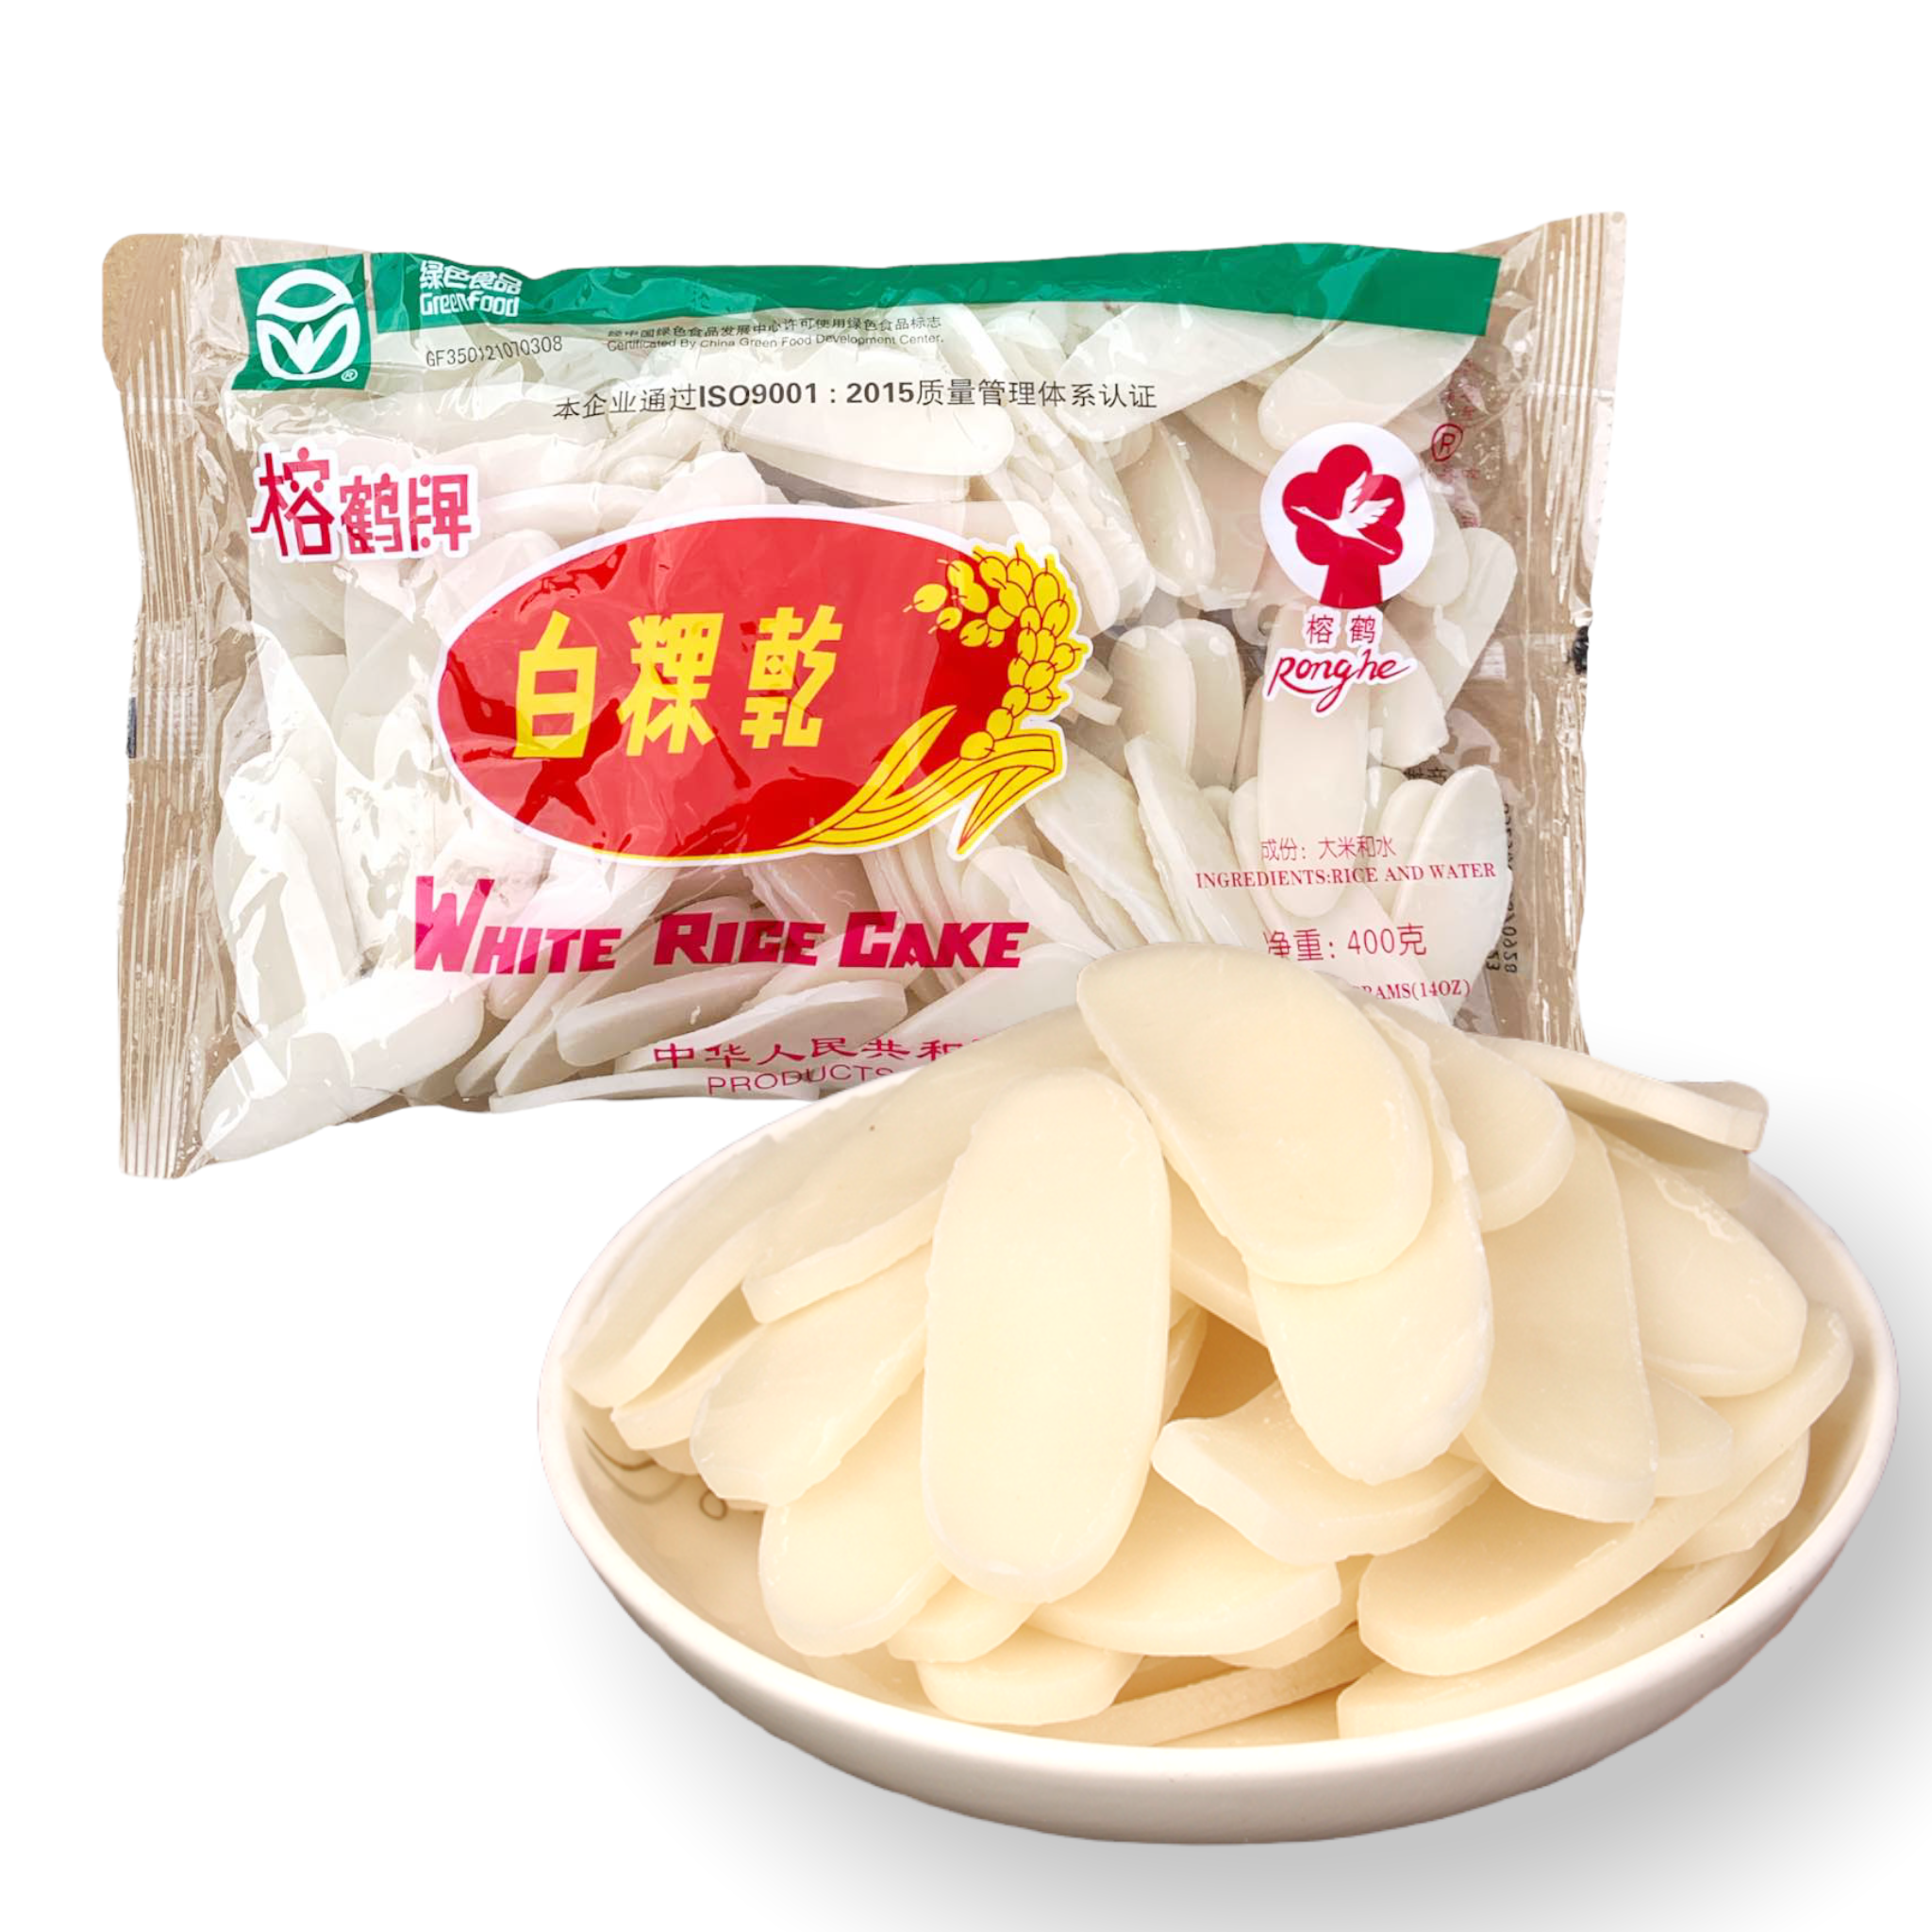 Chinese Rice Cake (Sliced Oval Shape) 400g - Rong He